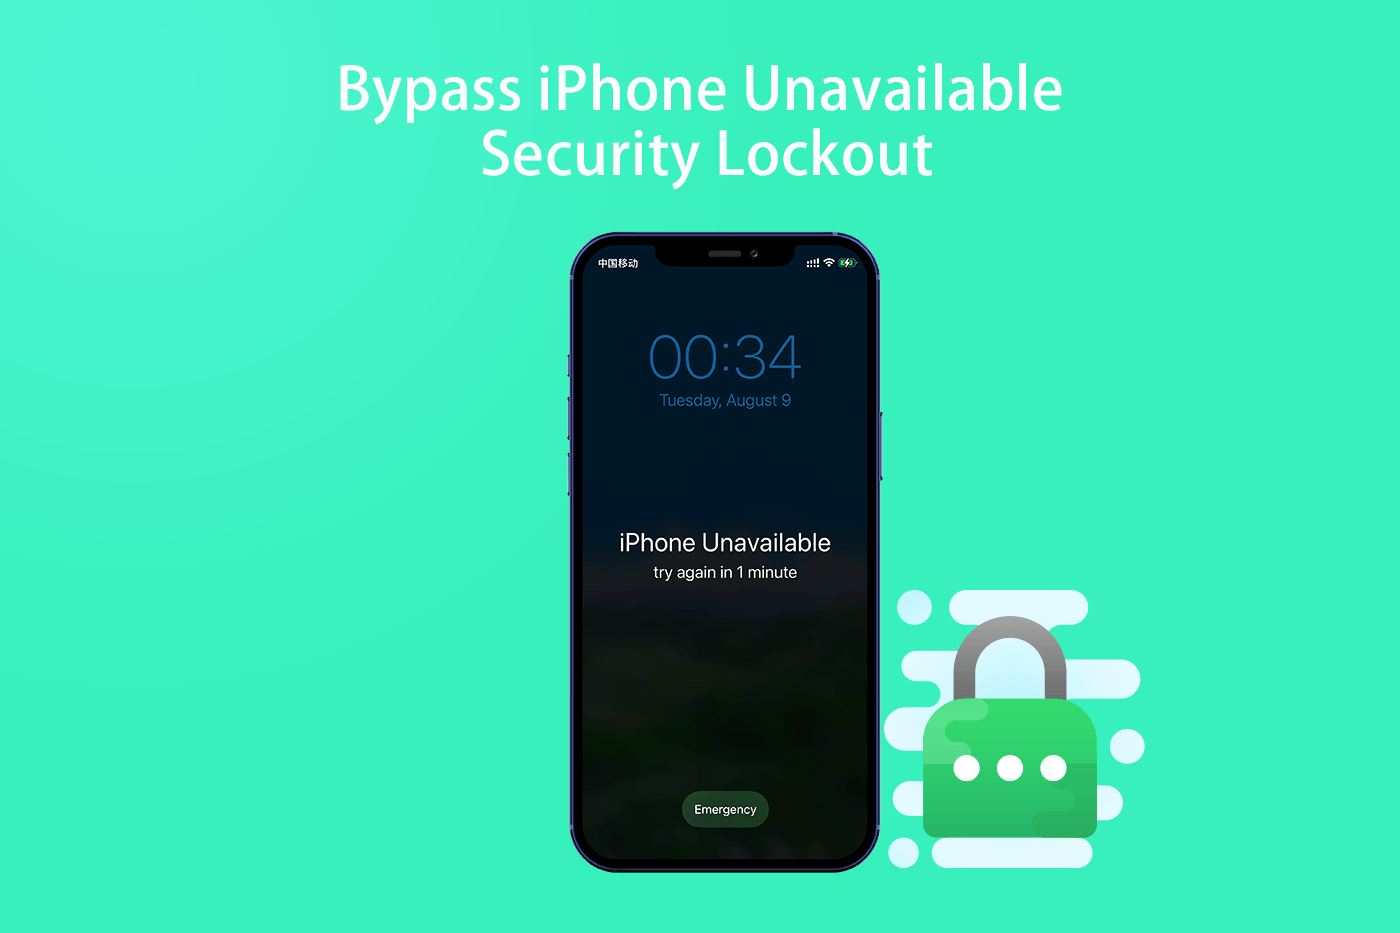 How To Bypass iPhone Unavailable/Security Lockout Screen